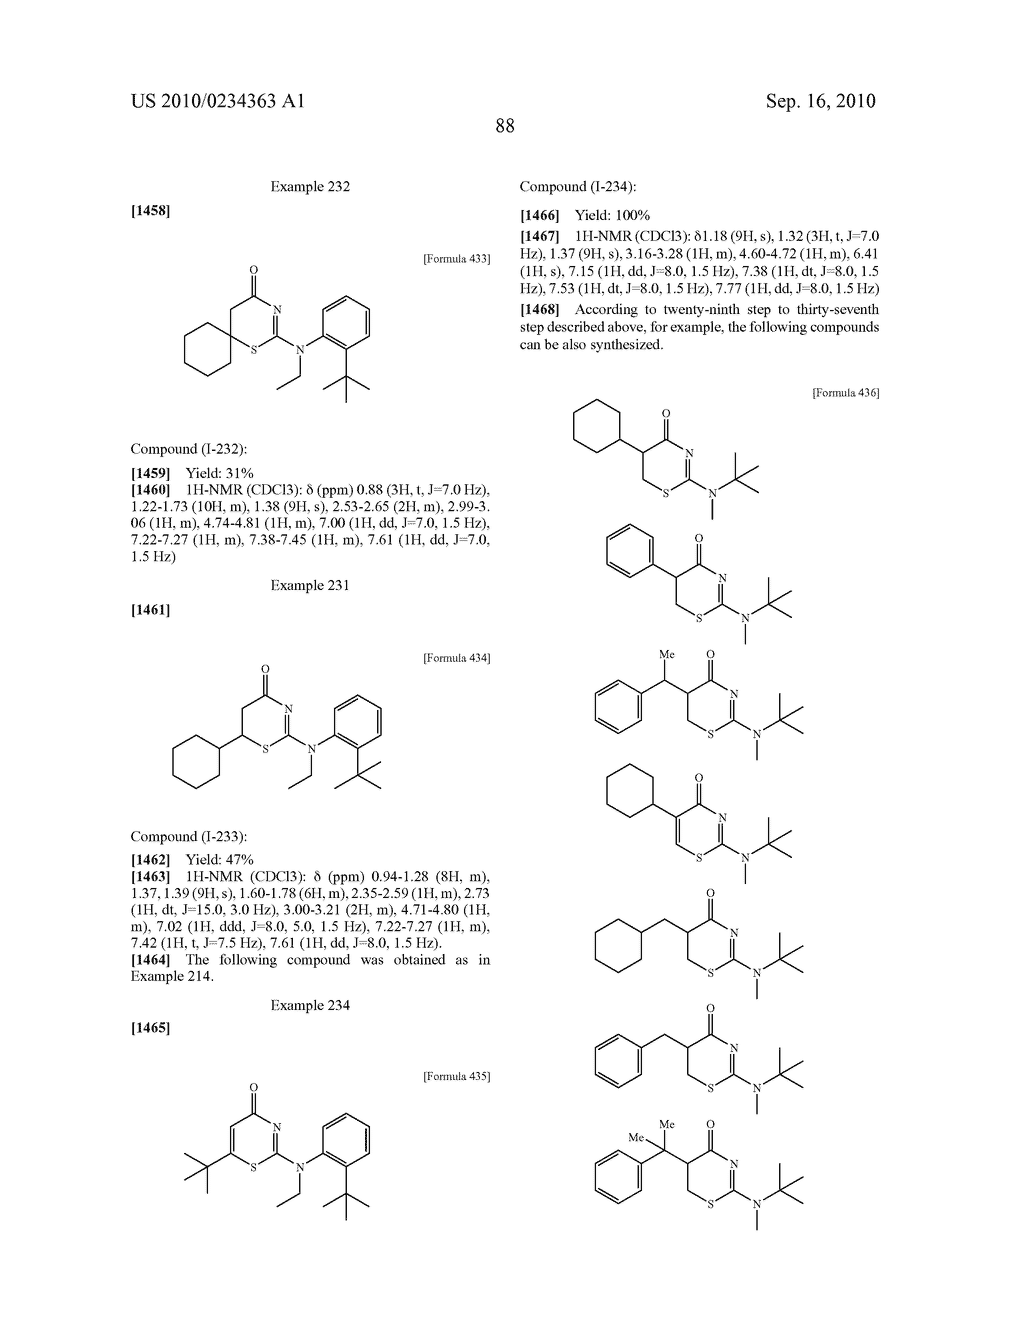 HETEROCYCLIC DERIVATIVE HAVING INHIBITORY ACTIVITY ON TYPE-I 11 DATA-HYDROXYSTEROID DEHYDROGENASE - diagram, schematic, and image 89